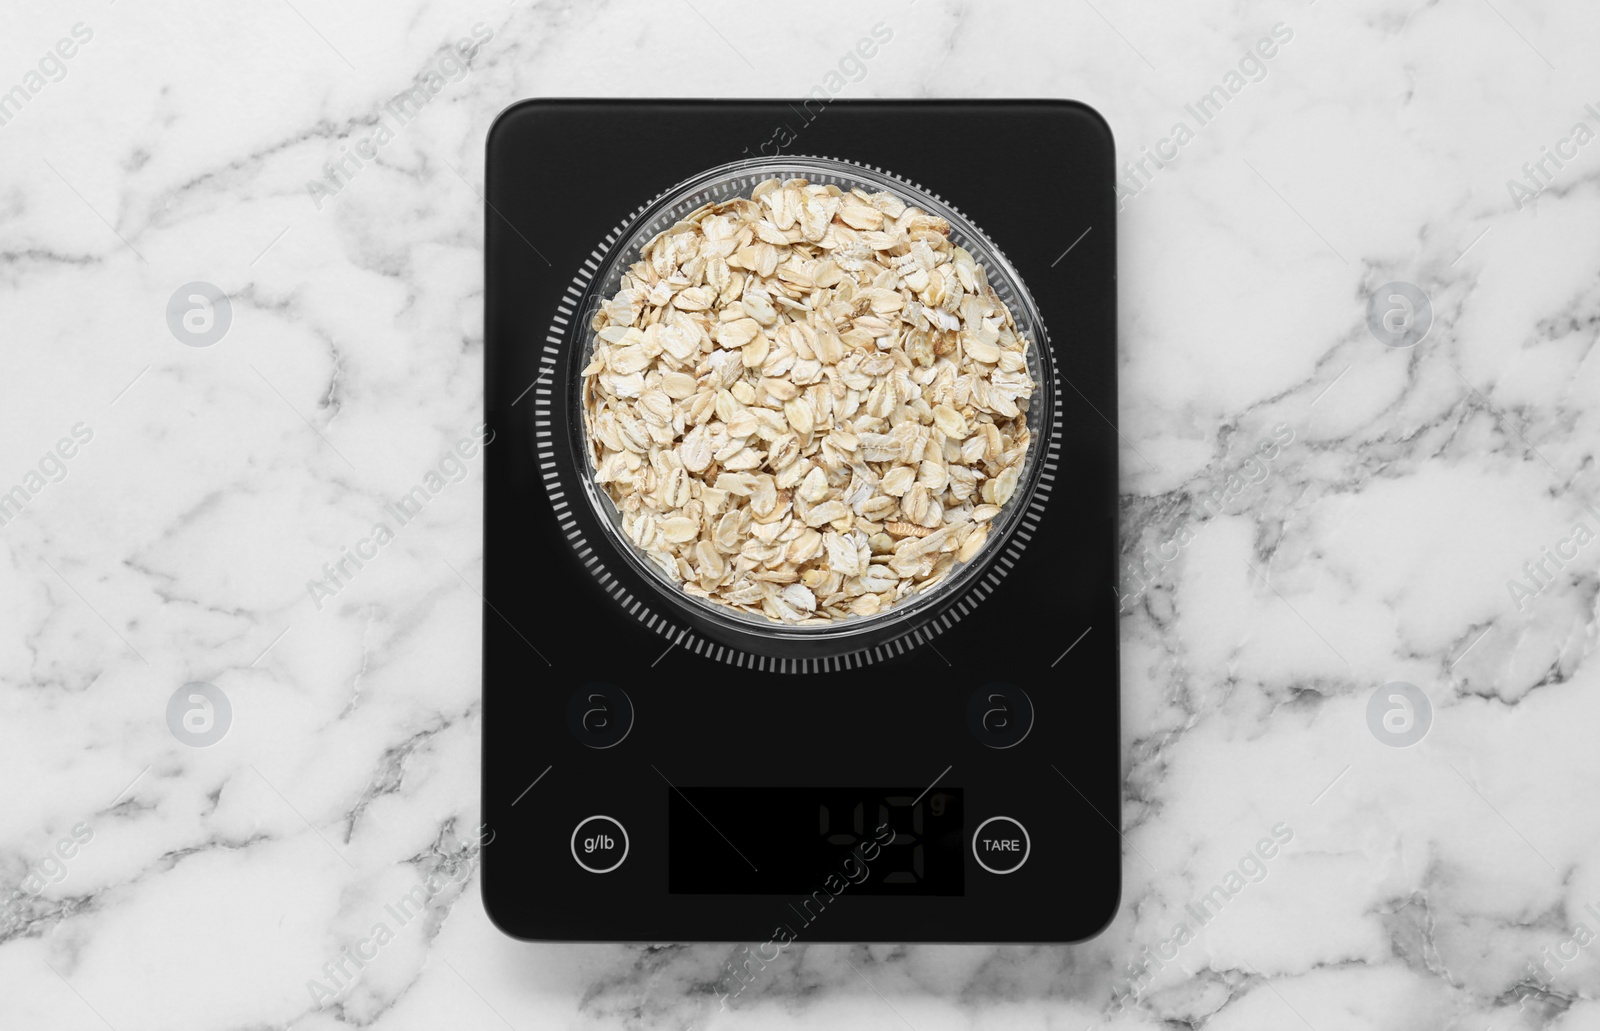 Photo of Digital kitchen scale with oat flakes on white marble table, top view